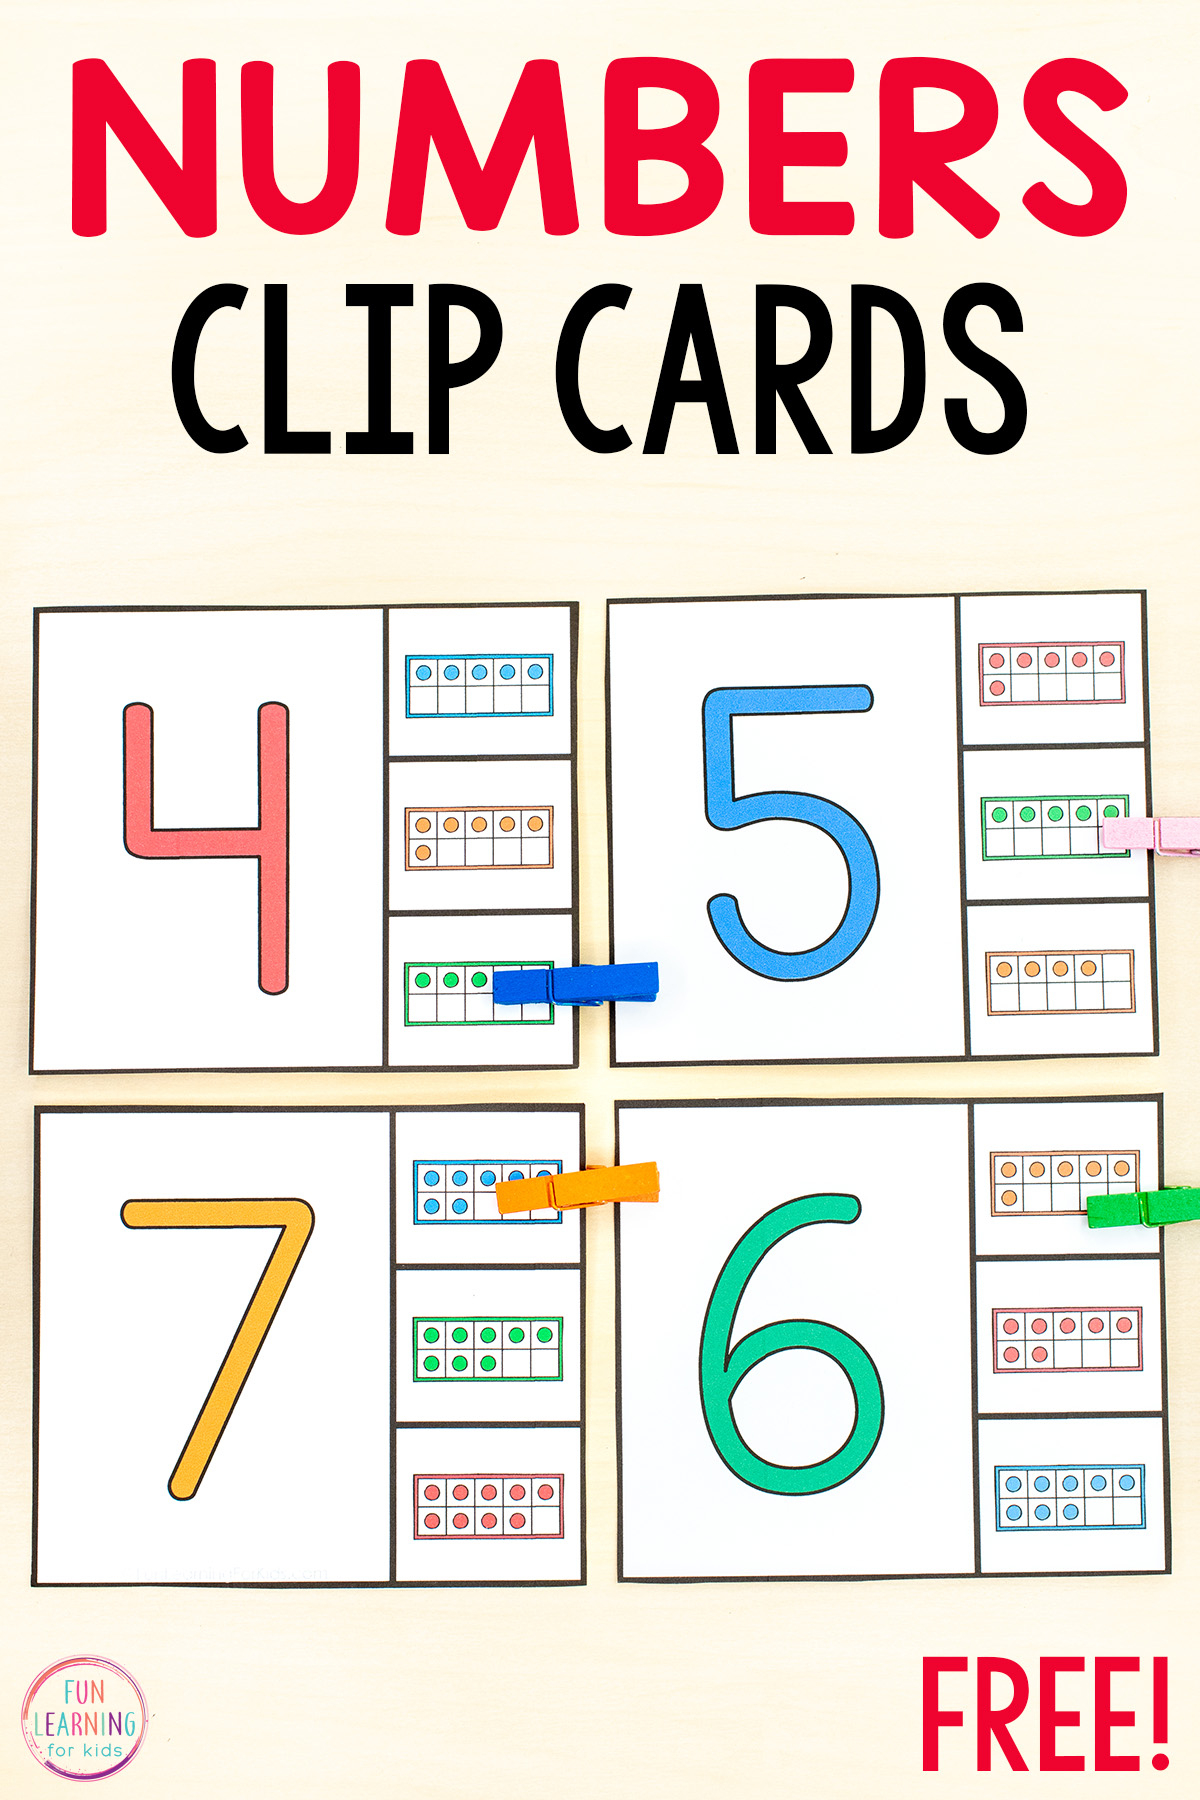 Free Printable Number Matching Clip Cards - Free Printable Clip Cards